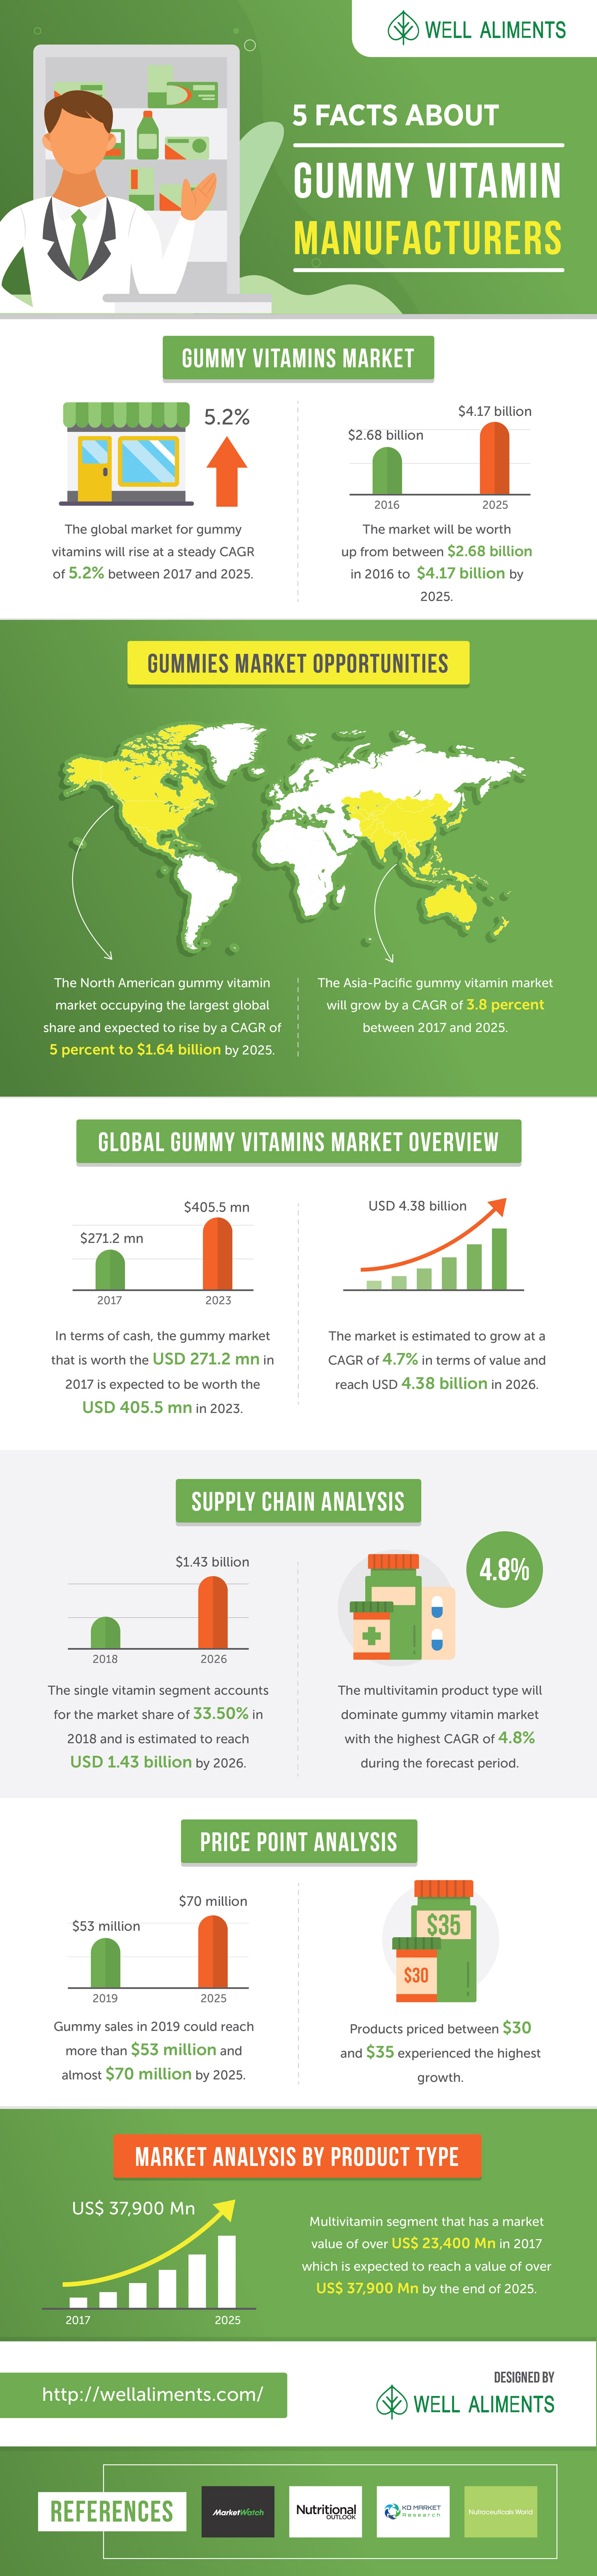 5 Facts About Gummy Vitamin Manufacturers